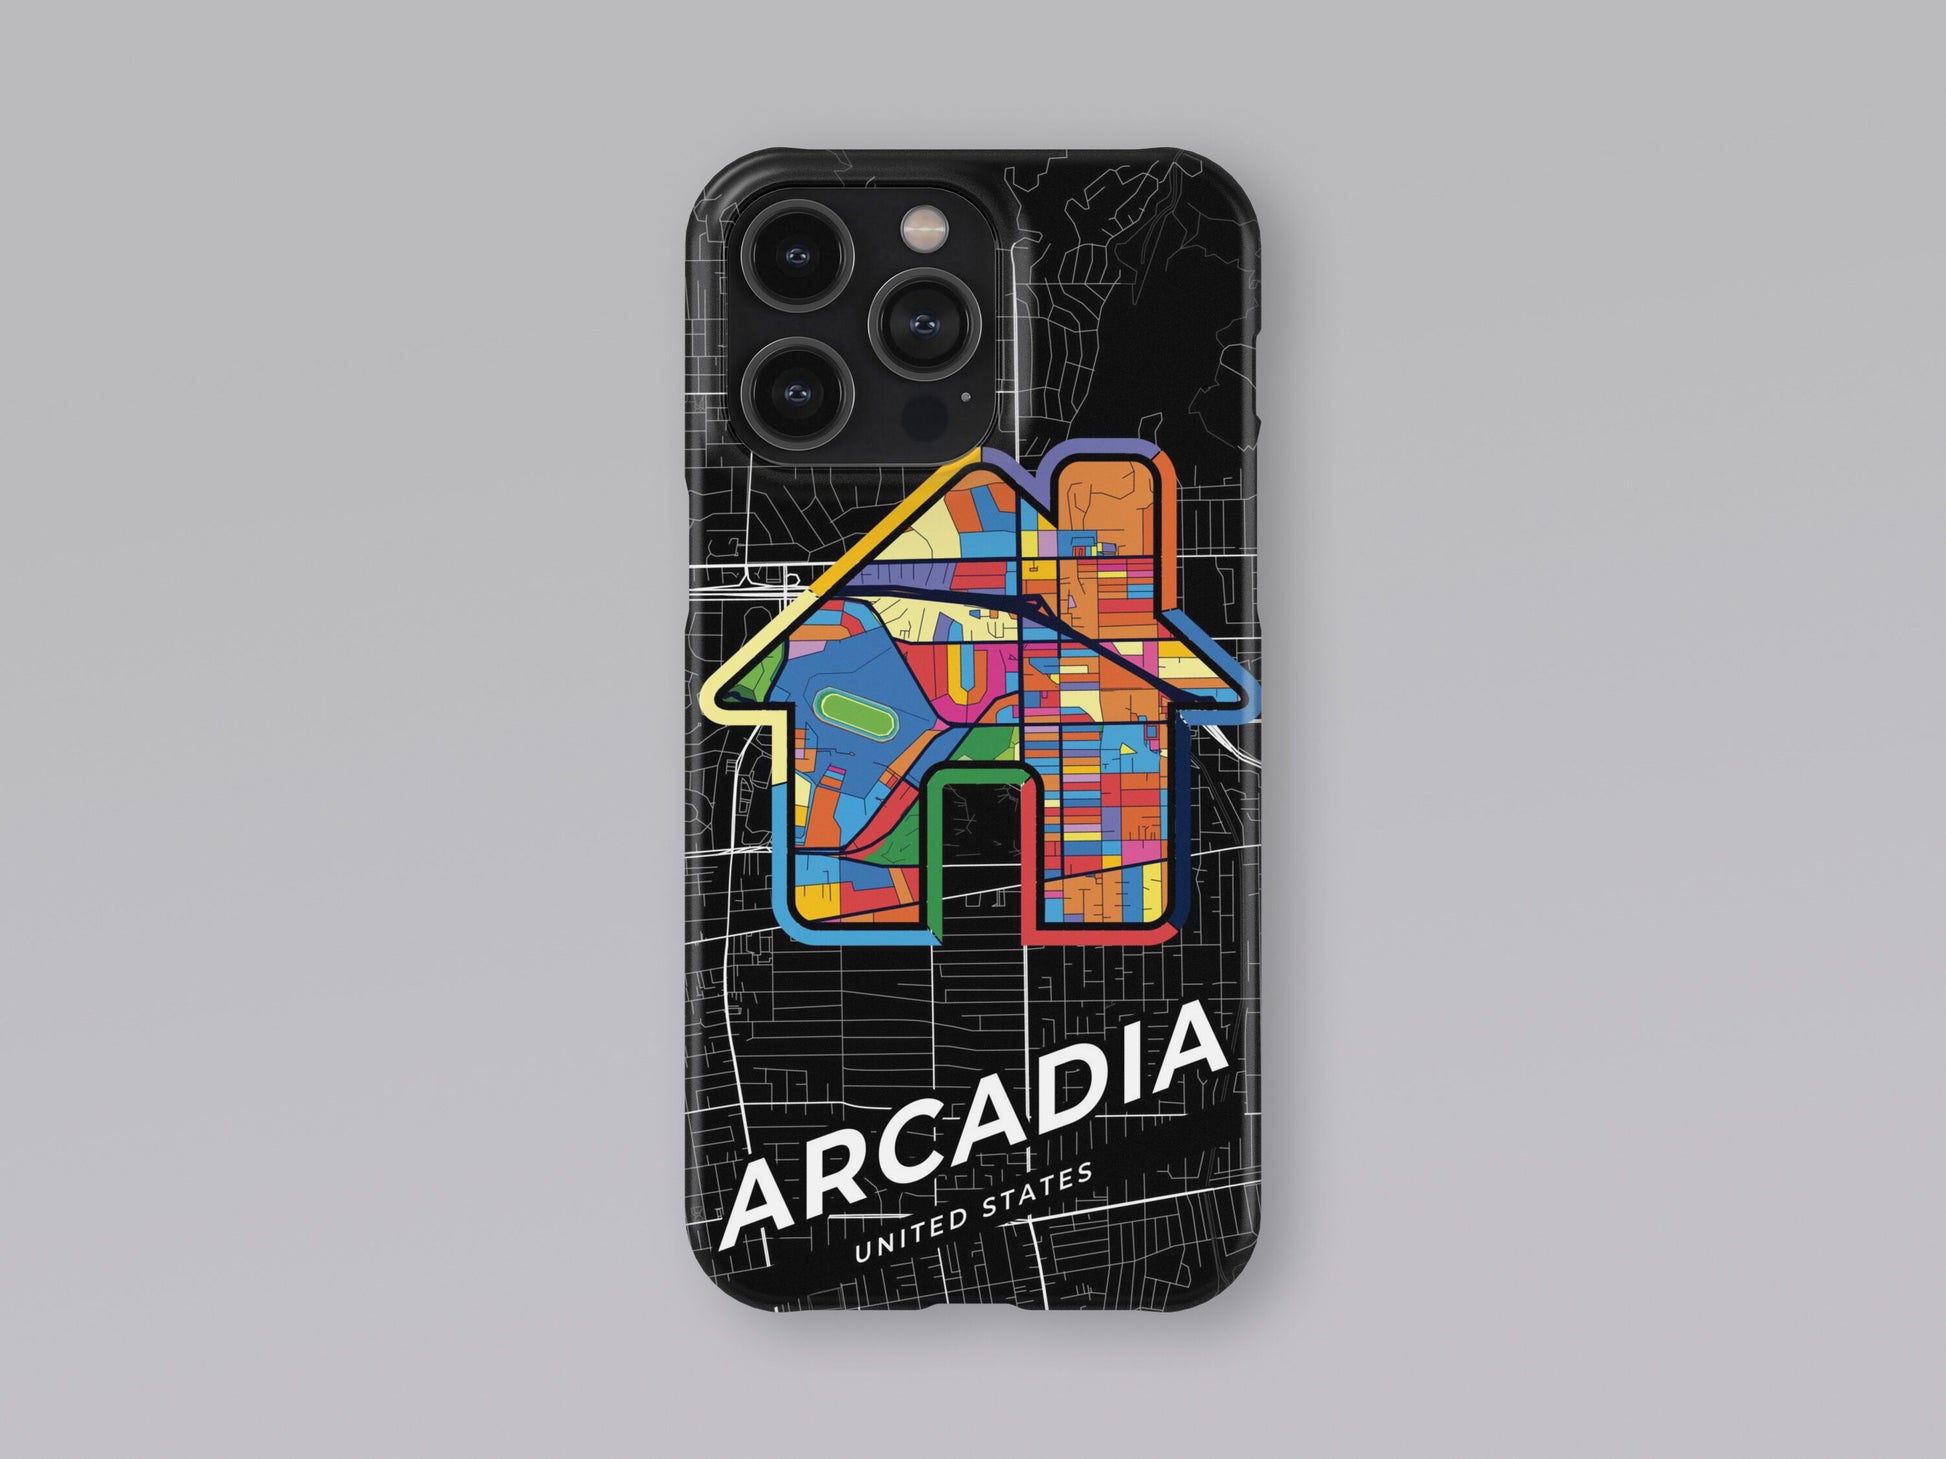 Arcadia California slim phone case with colorful icon. Birthday, wedding or housewarming gift. Couple match cases. 3